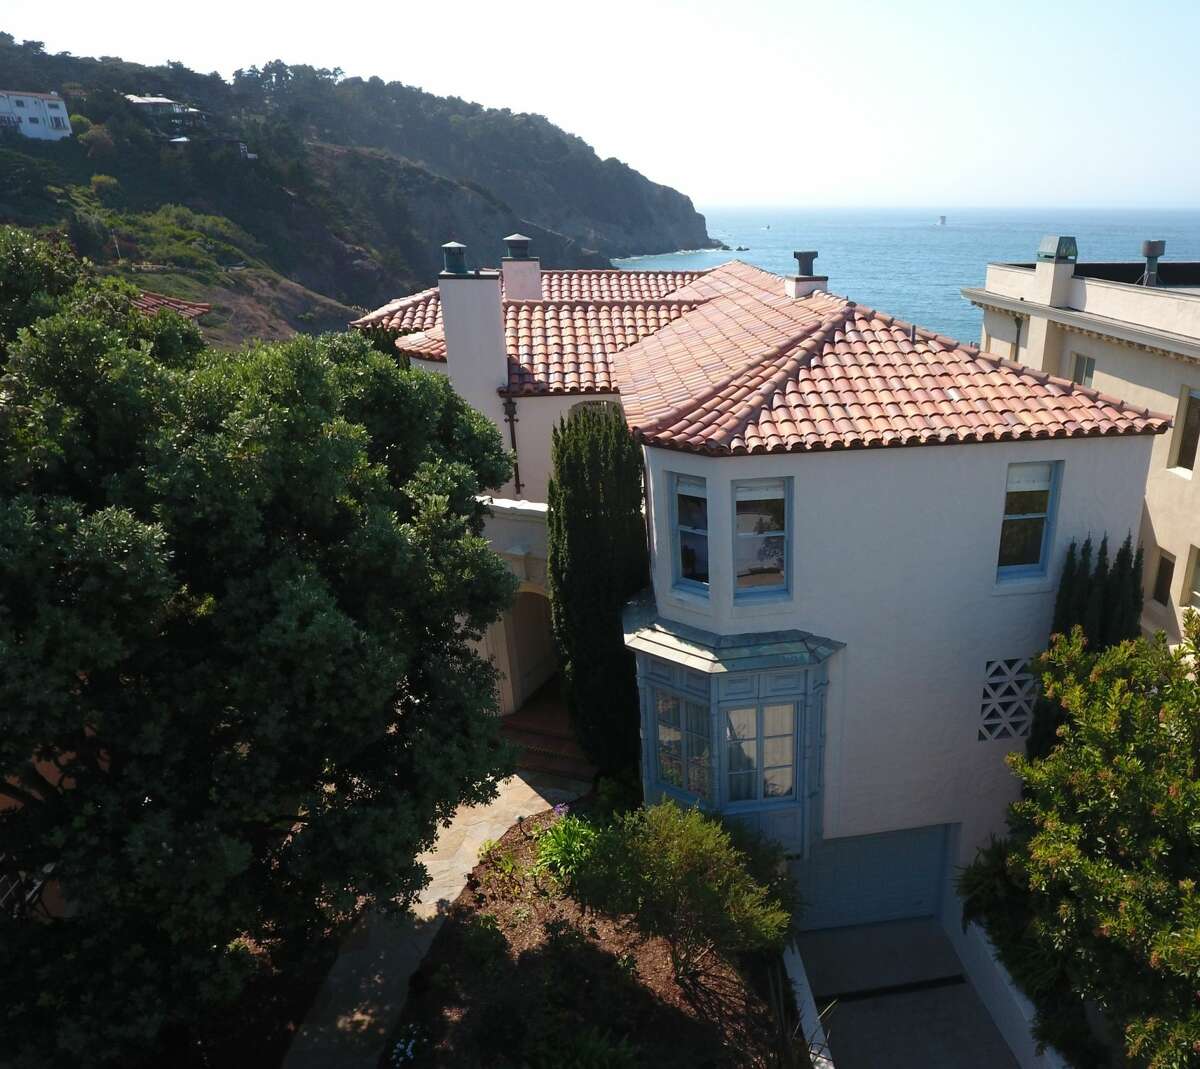 This elegant 1926 Spanish Colonial at 320 Sea Cliff Ave. overlooks China Beach and the ocean.